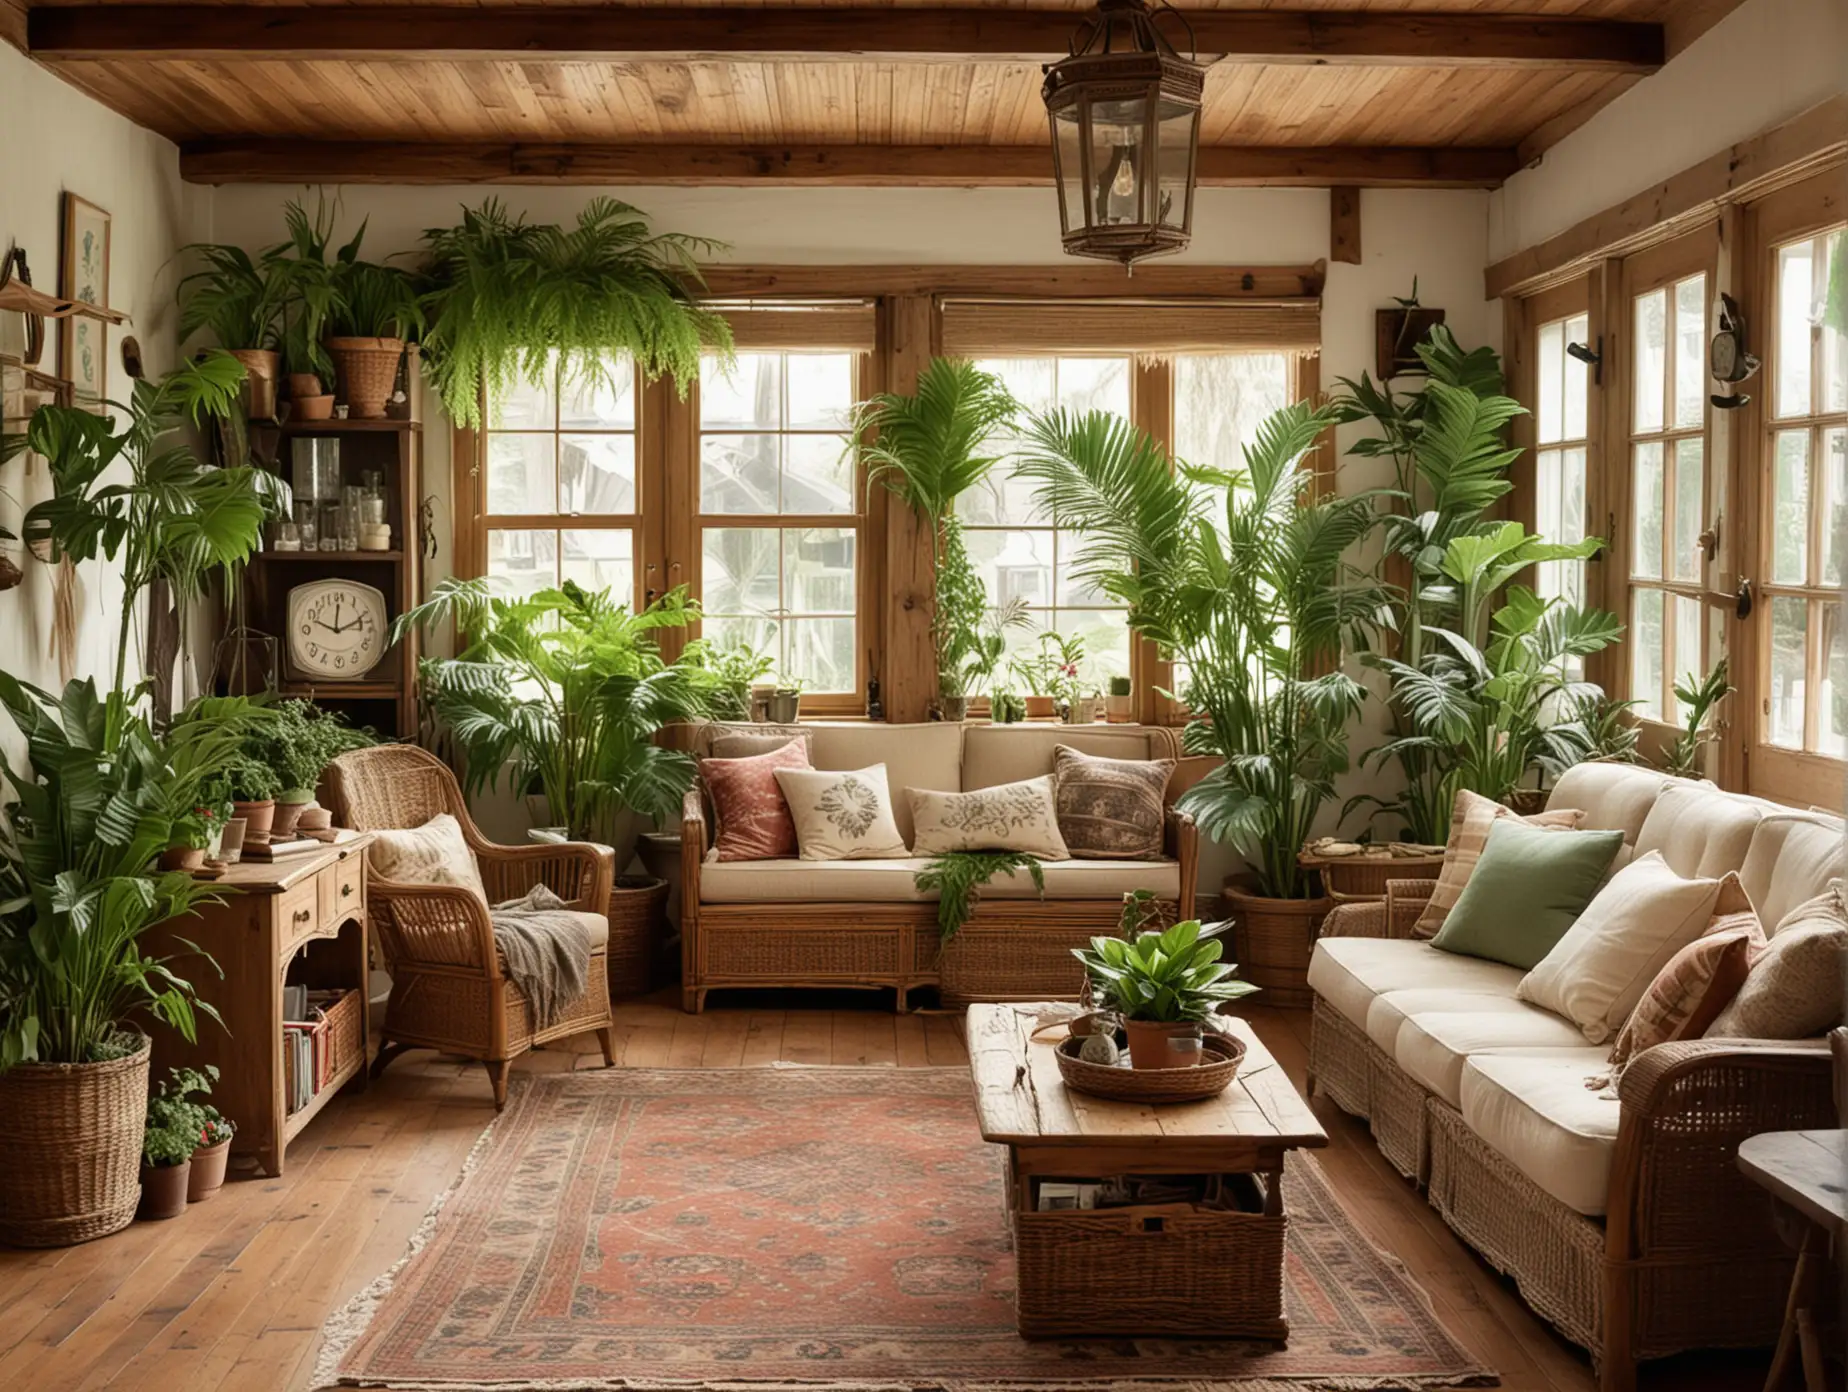 Cozy-Rustic-Vintage-Living-Room-Decor-with-House-Plants